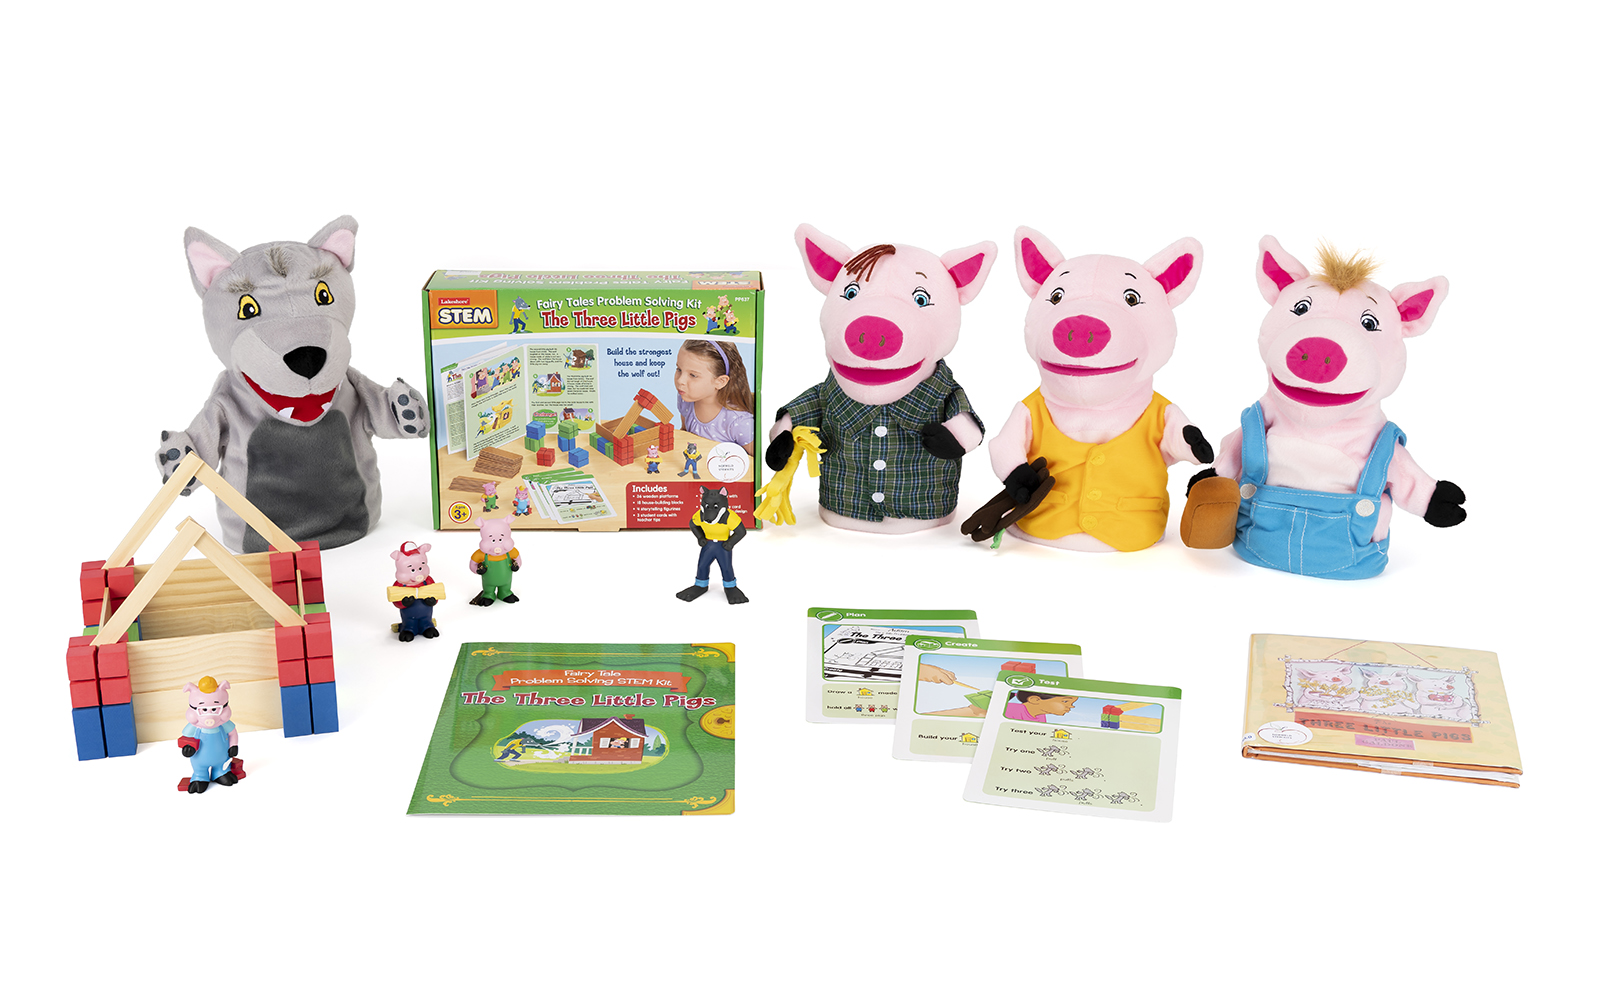 Contents of the Three Little Pigs Early Literacy Kit